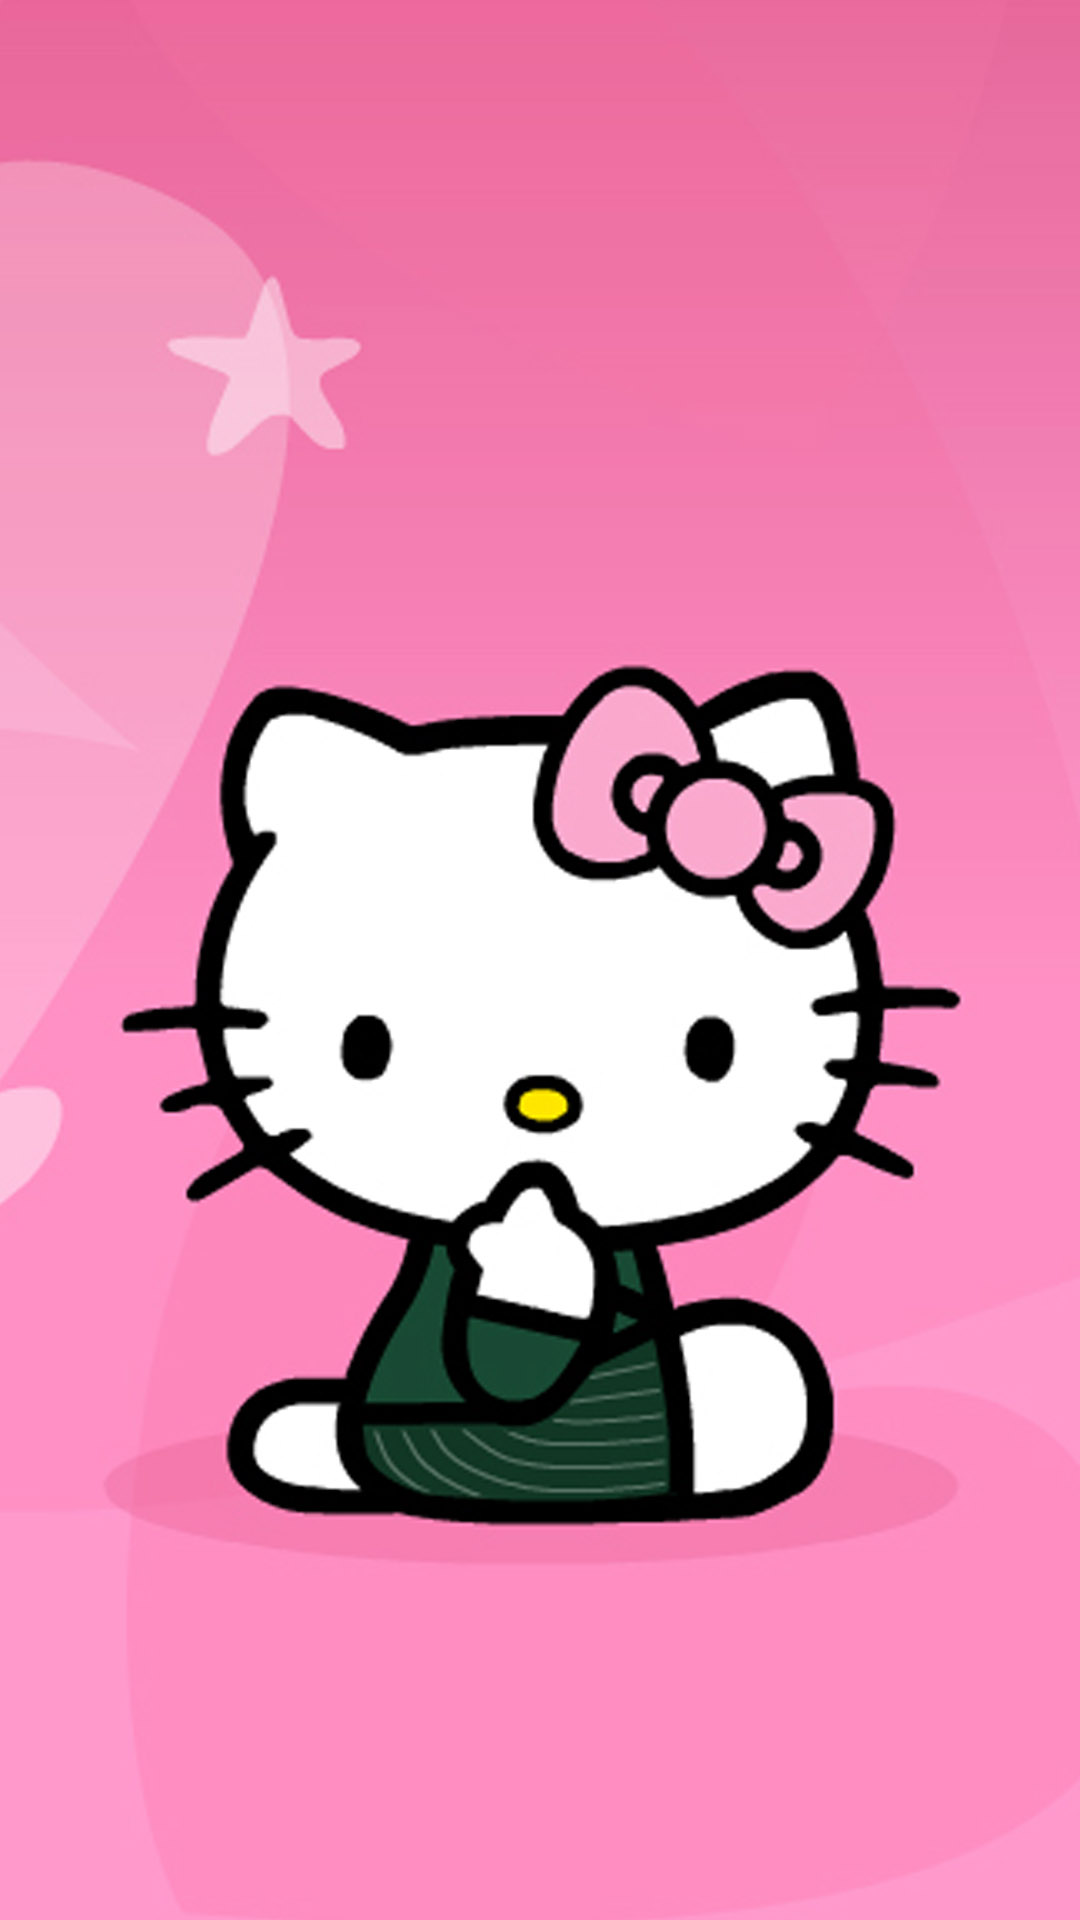 iPhone Plus HD Wallpaper For Hello Kitty Lovers